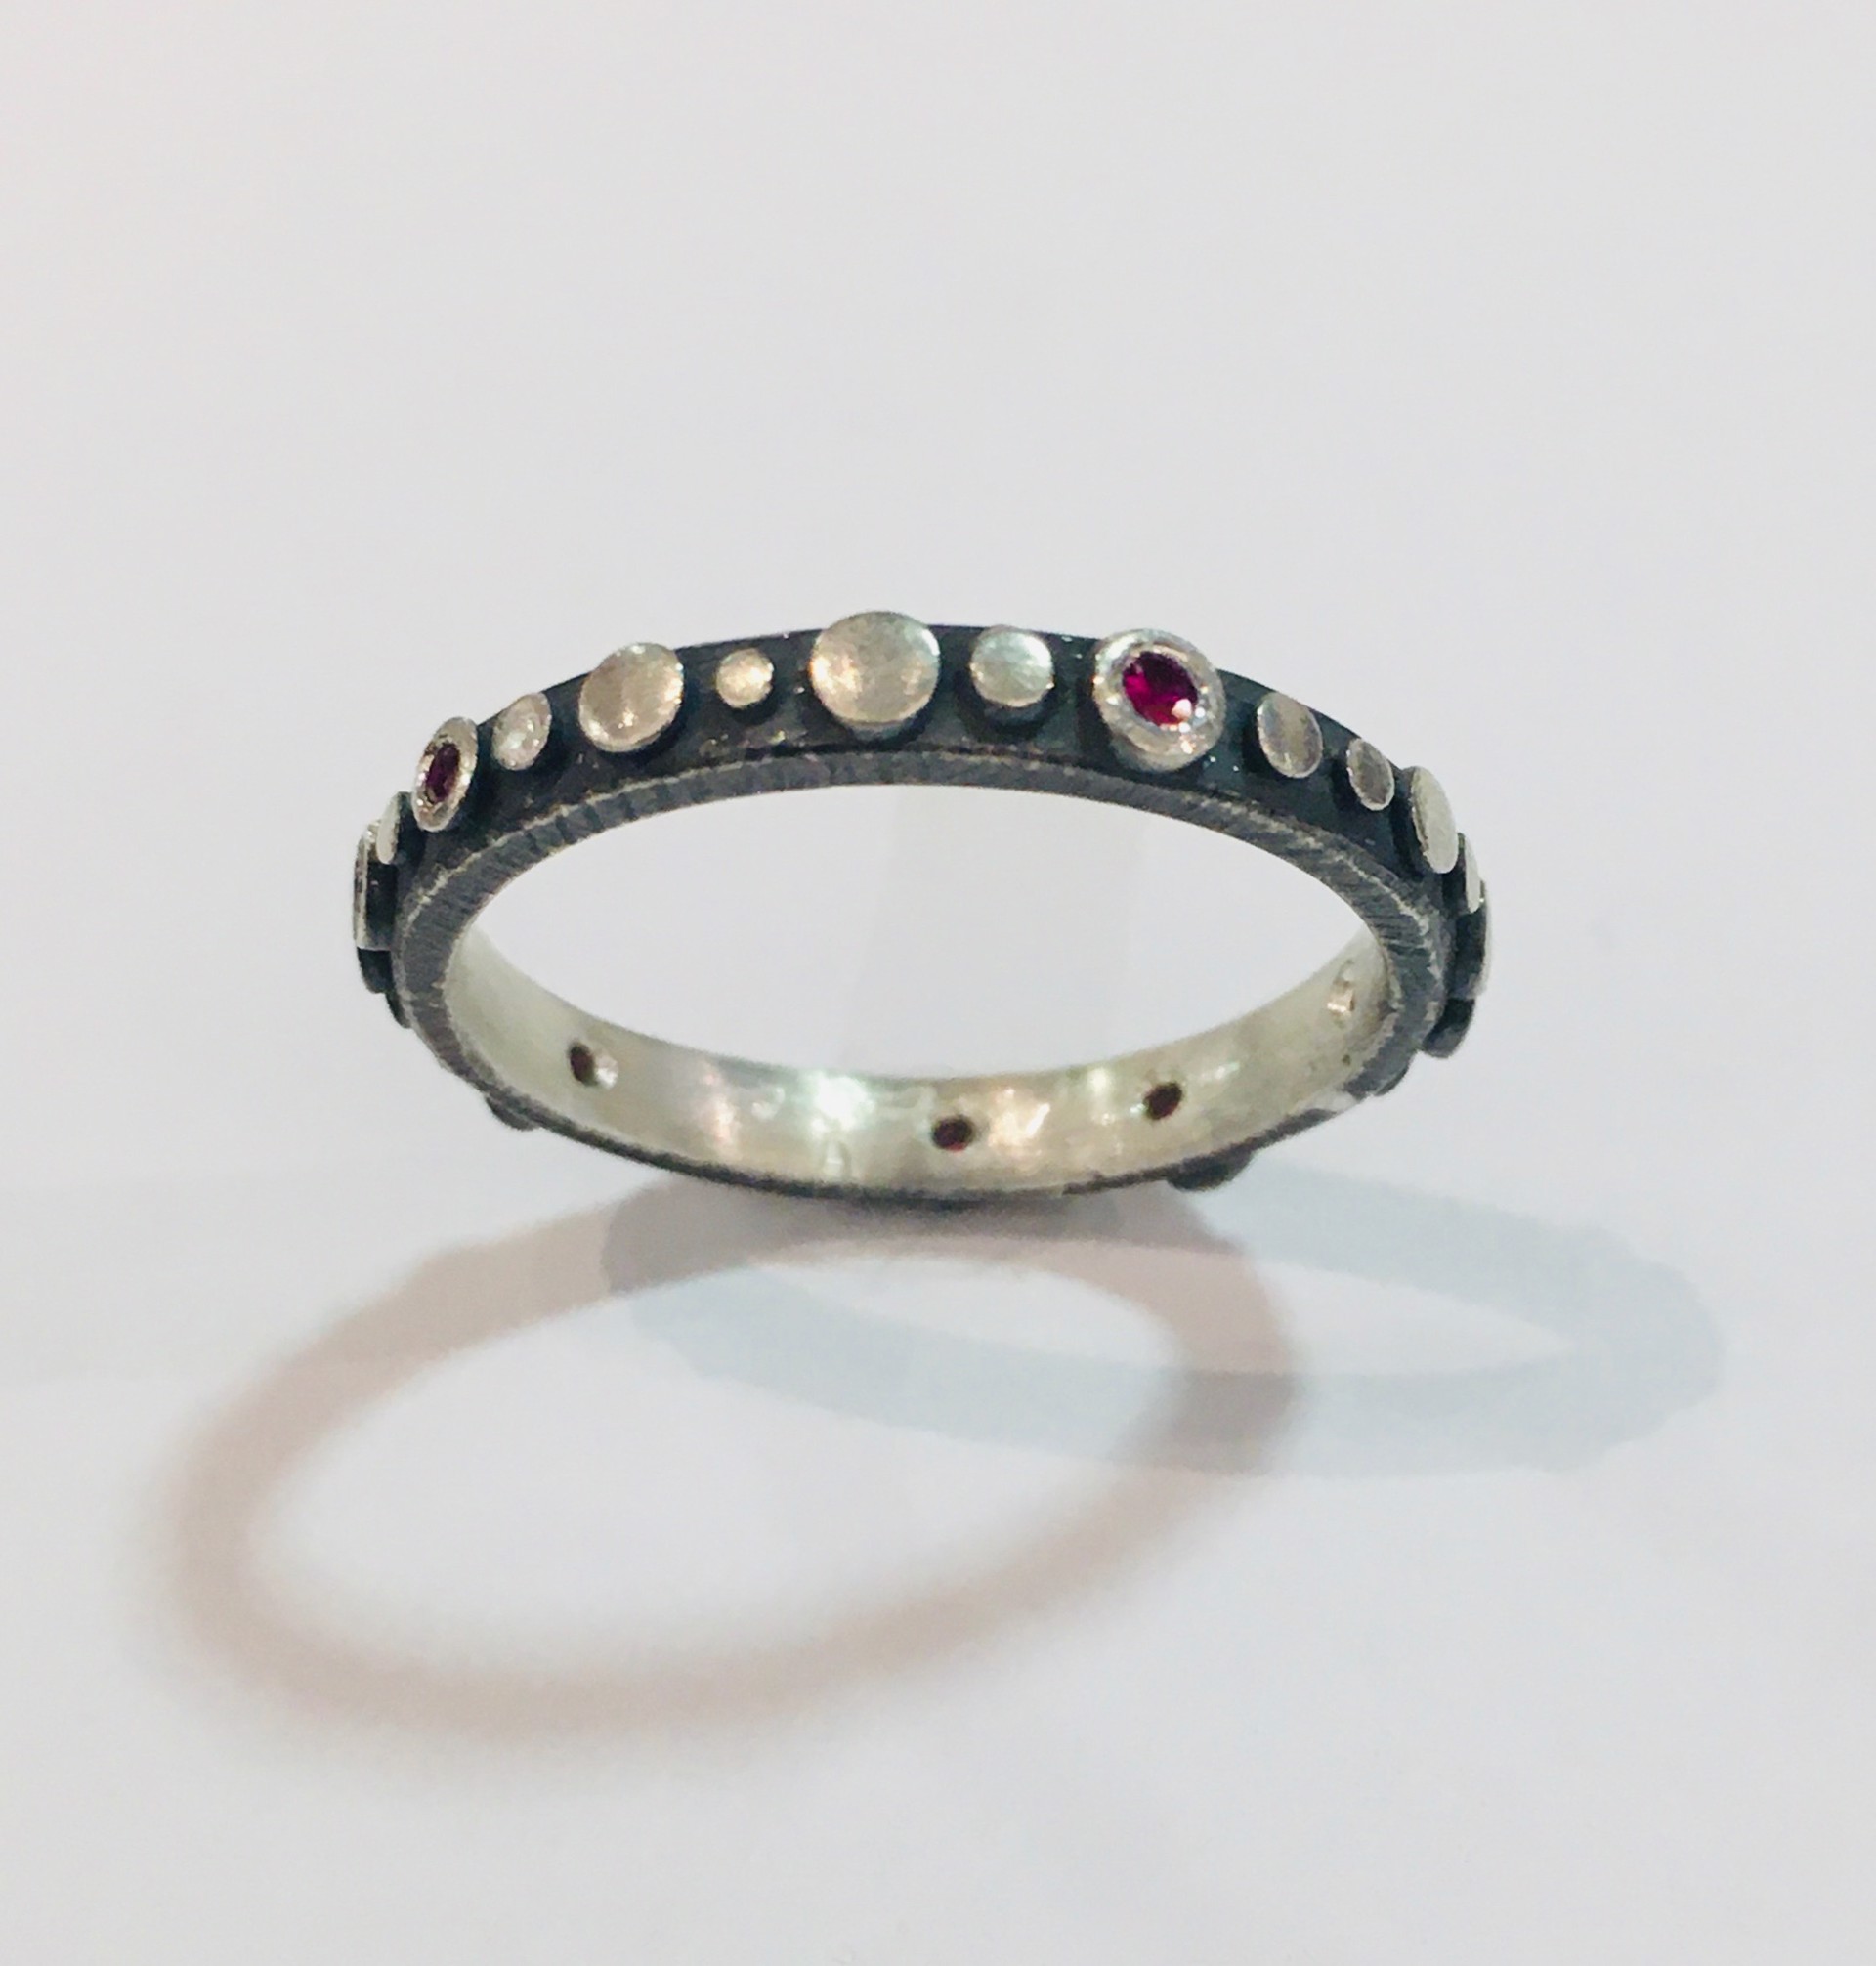 Thin Oxidized Silver Ring by DAHLIA KANNER